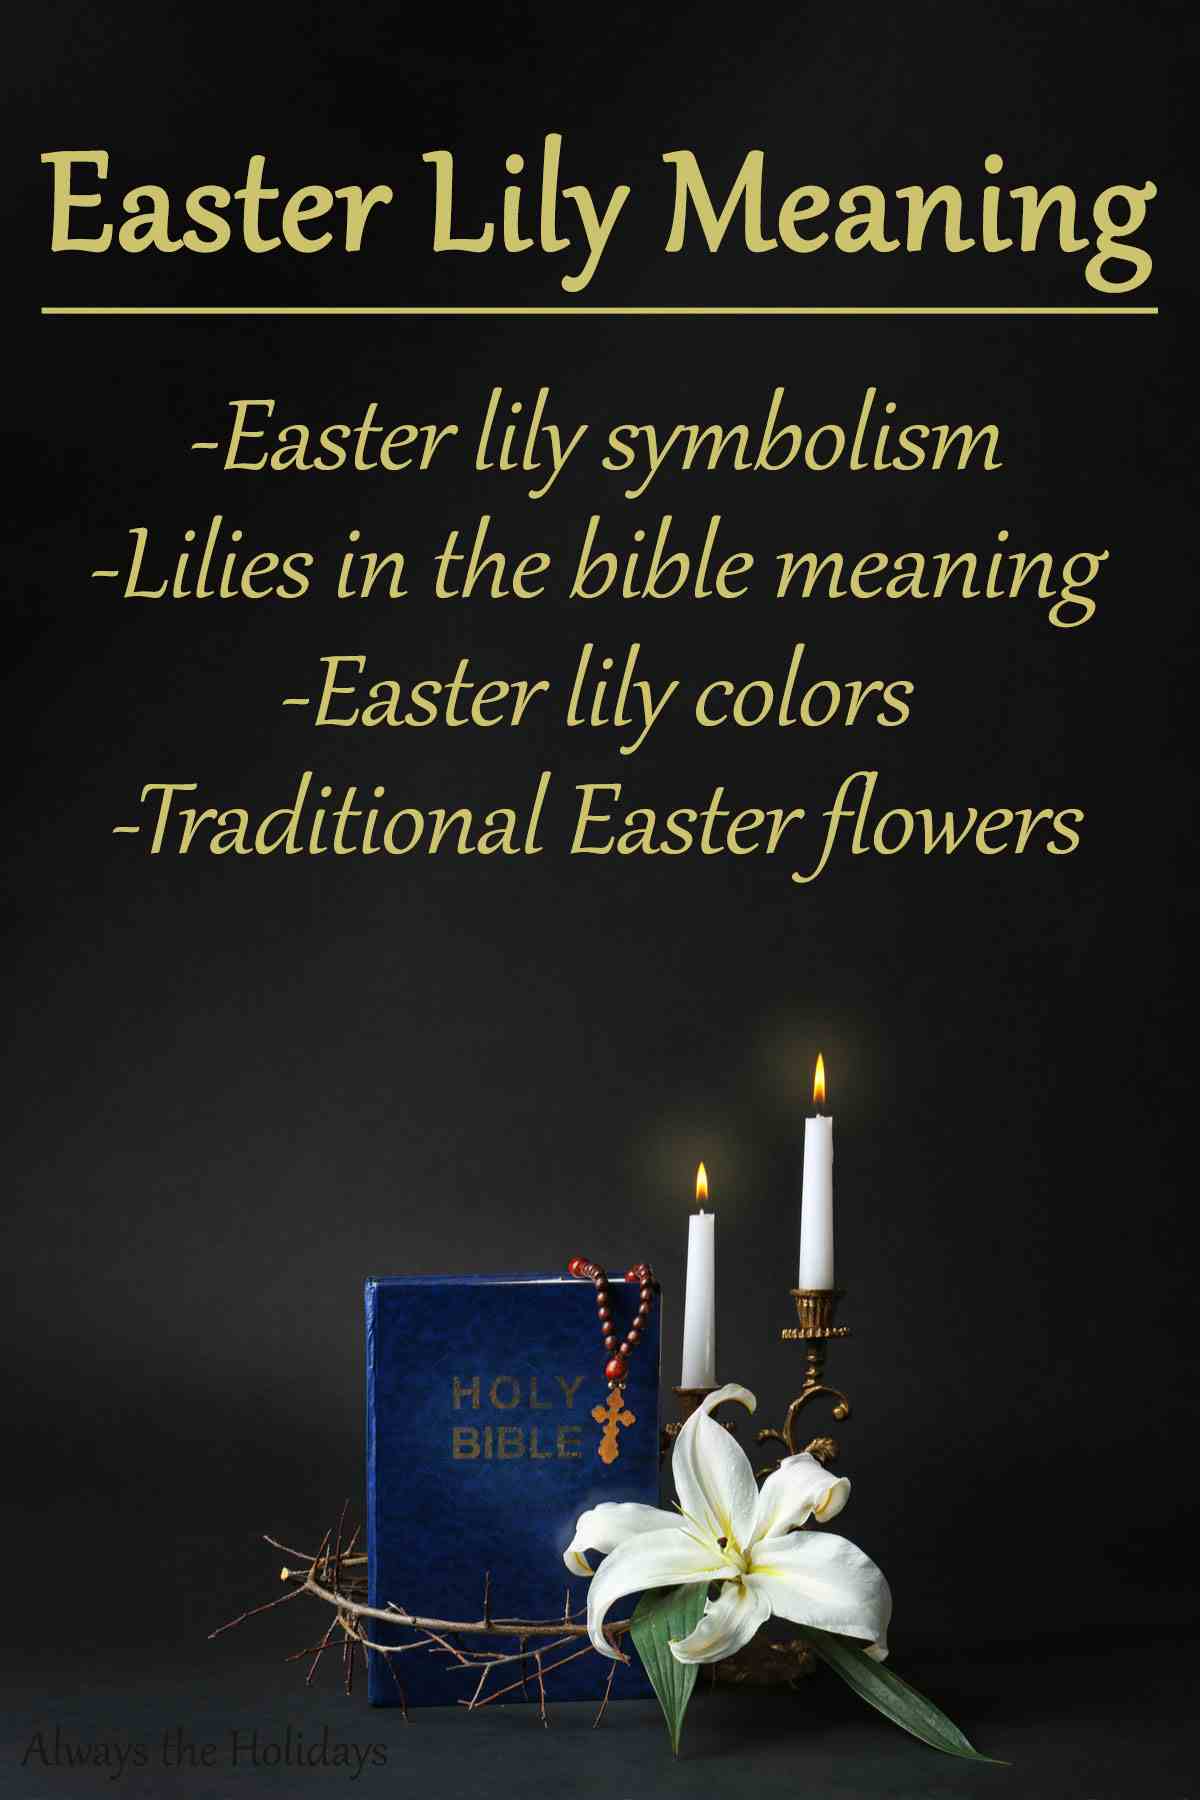 Easter Lily Meaning and Symbolism - Lilies in the Bible, Easter Lily Colors